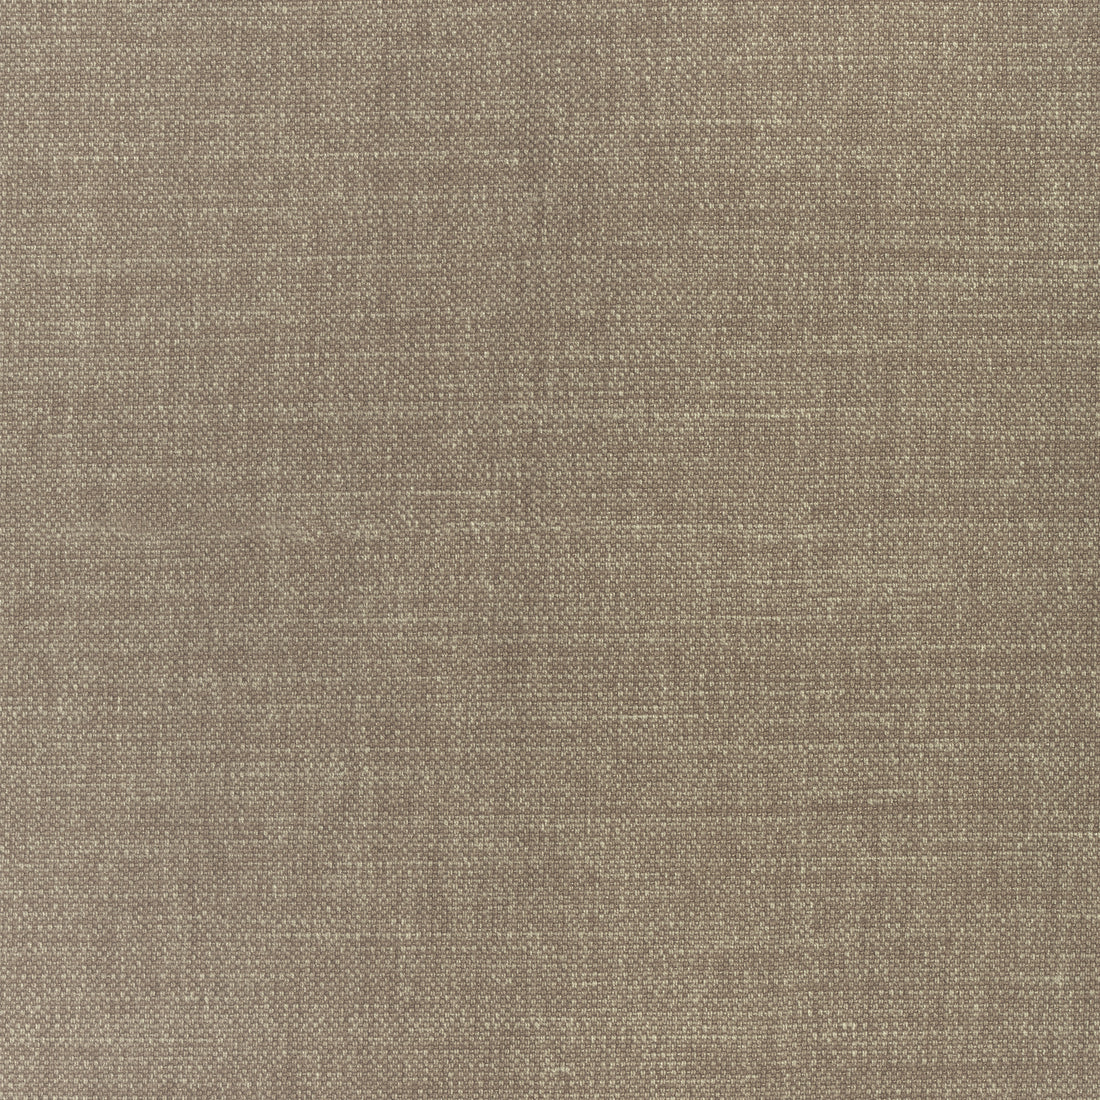 Prisma fabric in fawn color - pattern number W70109 - by Thibaut in the Woven Resource Vol 12 Prisma Fabrics collection